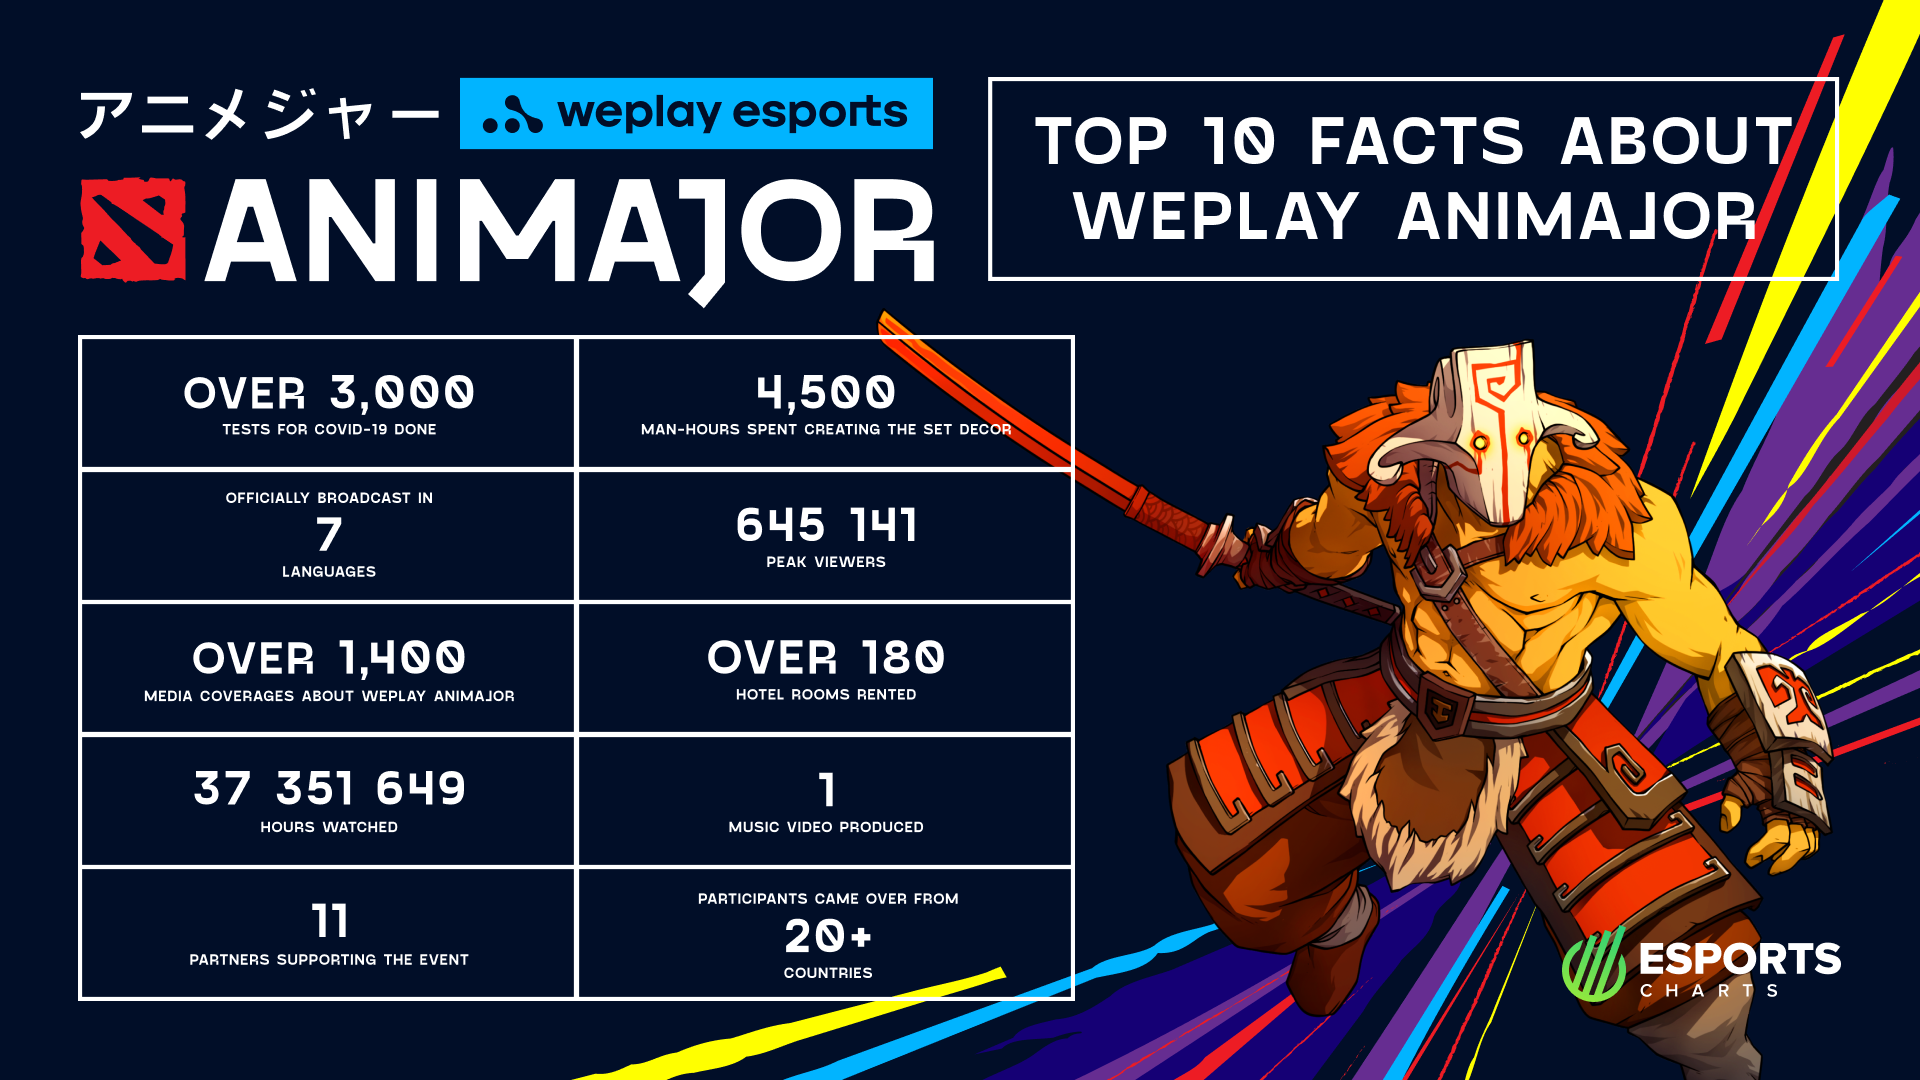 Top 10 facts about WePlay AniMajor. Image: WePlay Holding